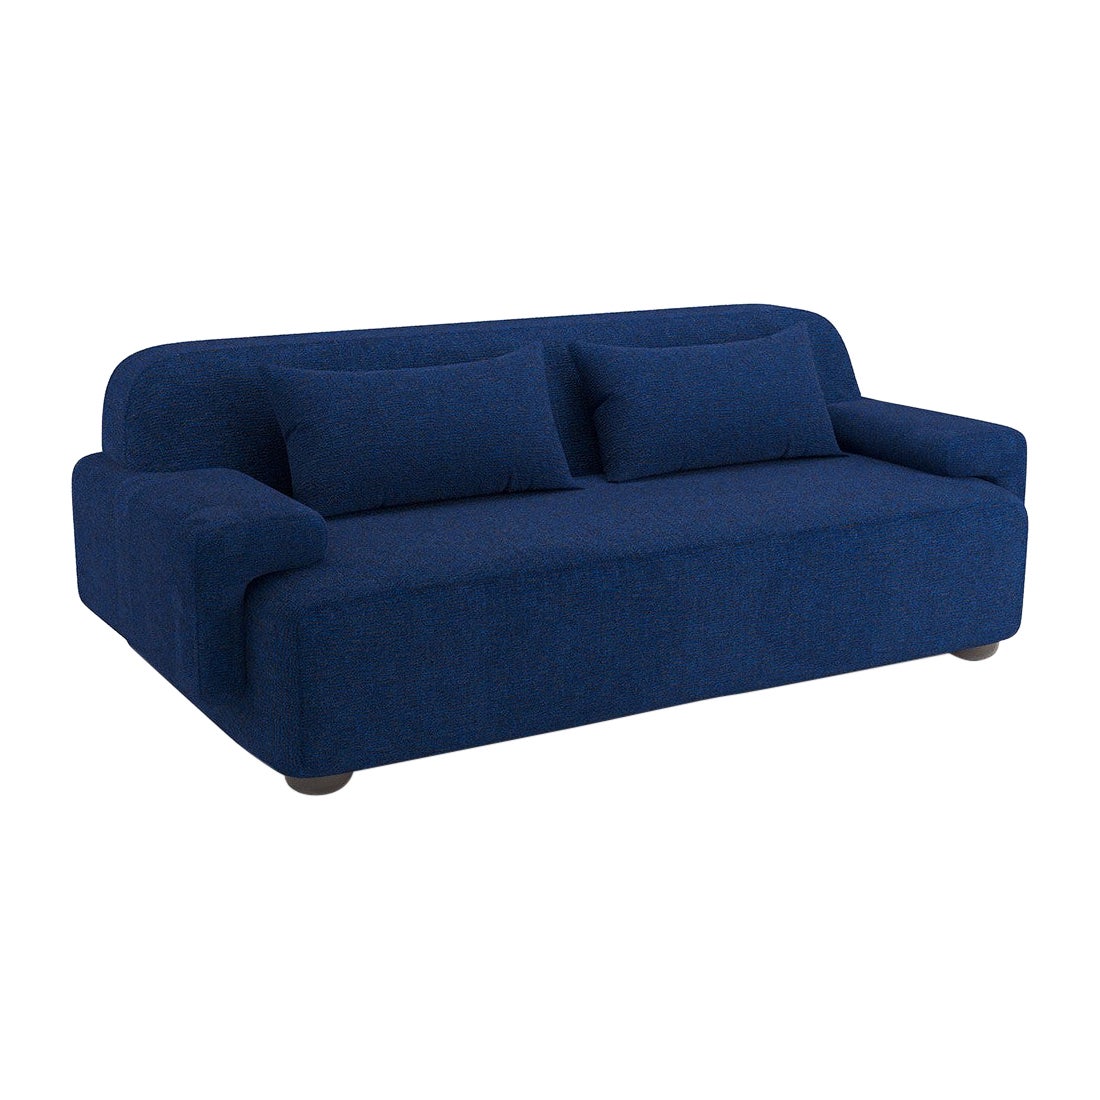 Popus Editions Lena 2.5 Seater Sofa in Ocean Megeve Fabric with Knit Effect For Sale